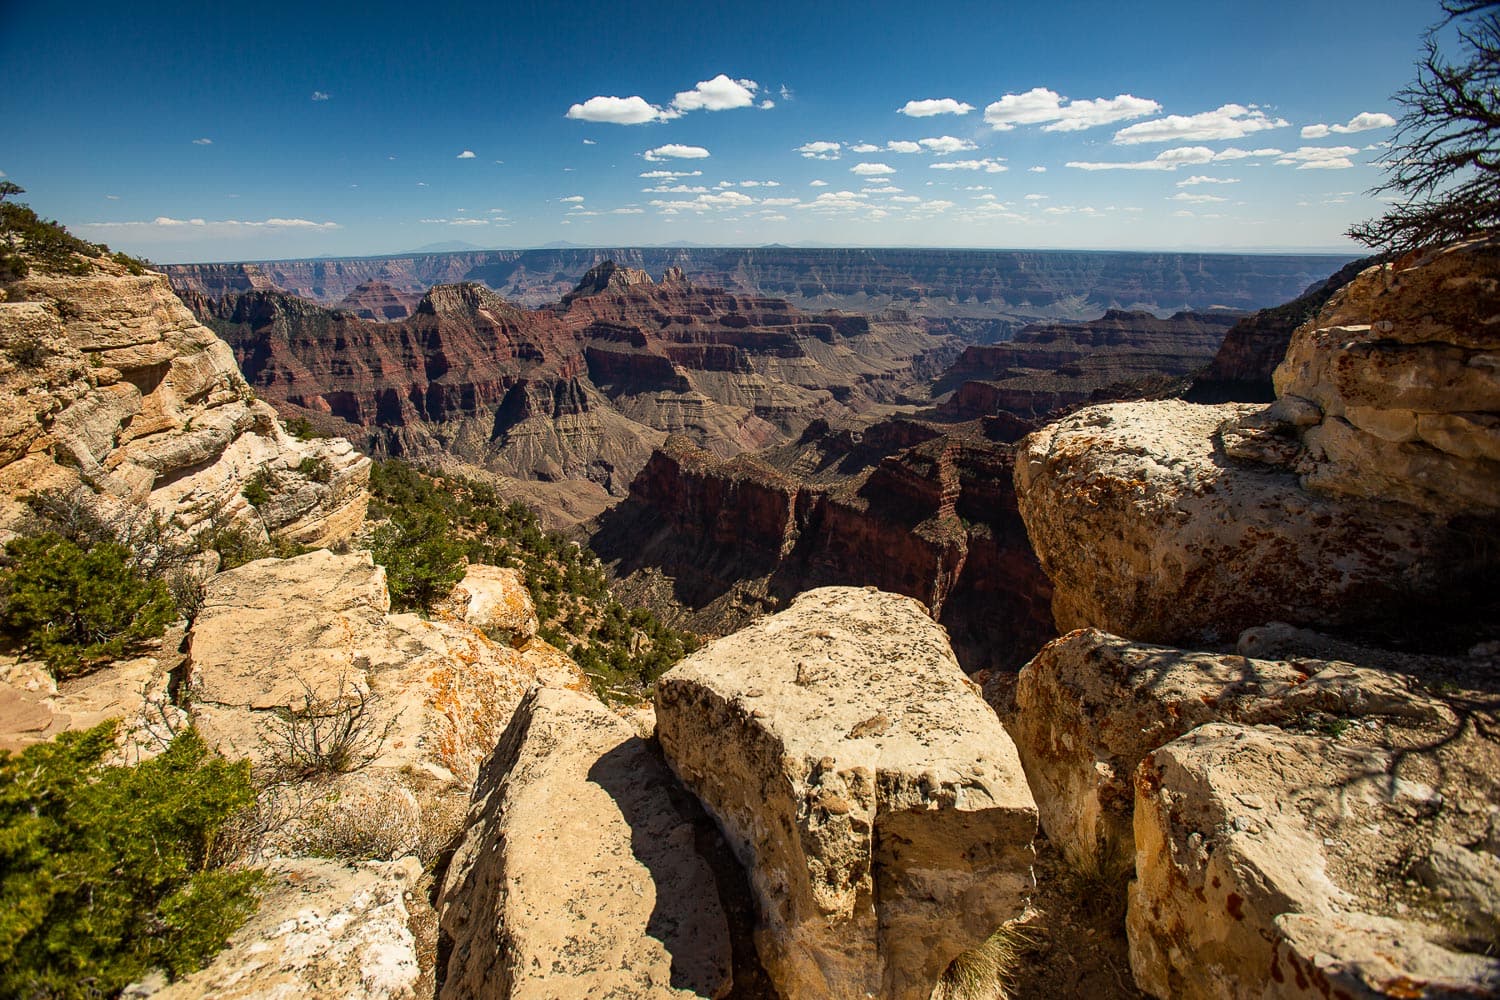 The south rim of the grand canyon in early summer with blue sky and yellow rocks framing the overlook.